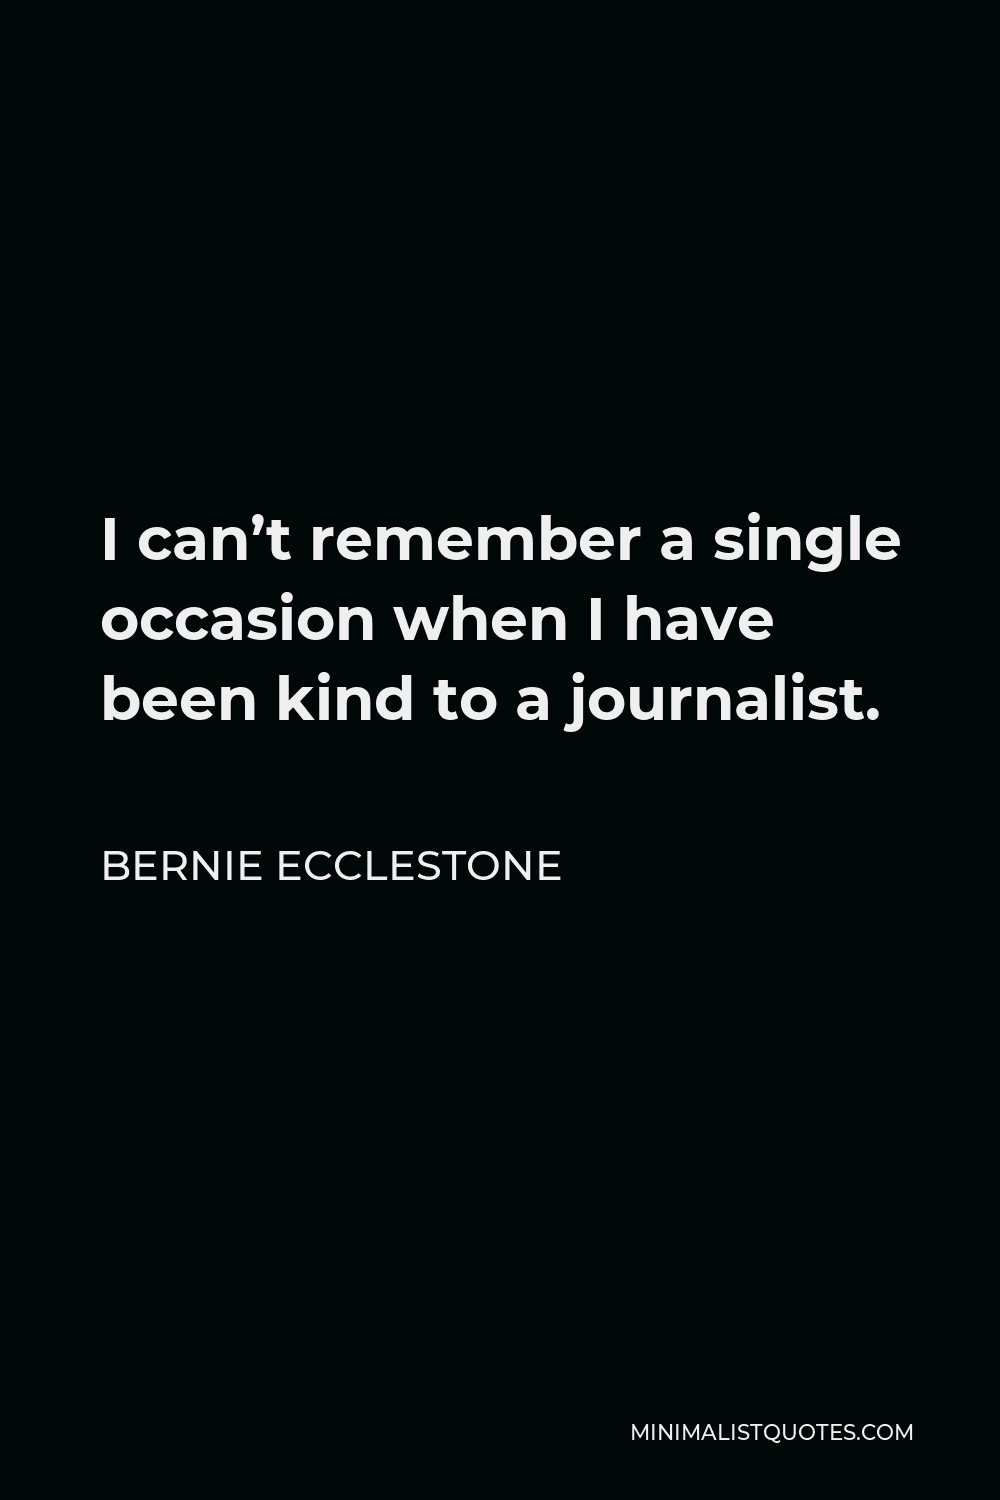 Bernie Ecclestone Quote - I can’t remember a single occasion when I have been kind to a journalist.